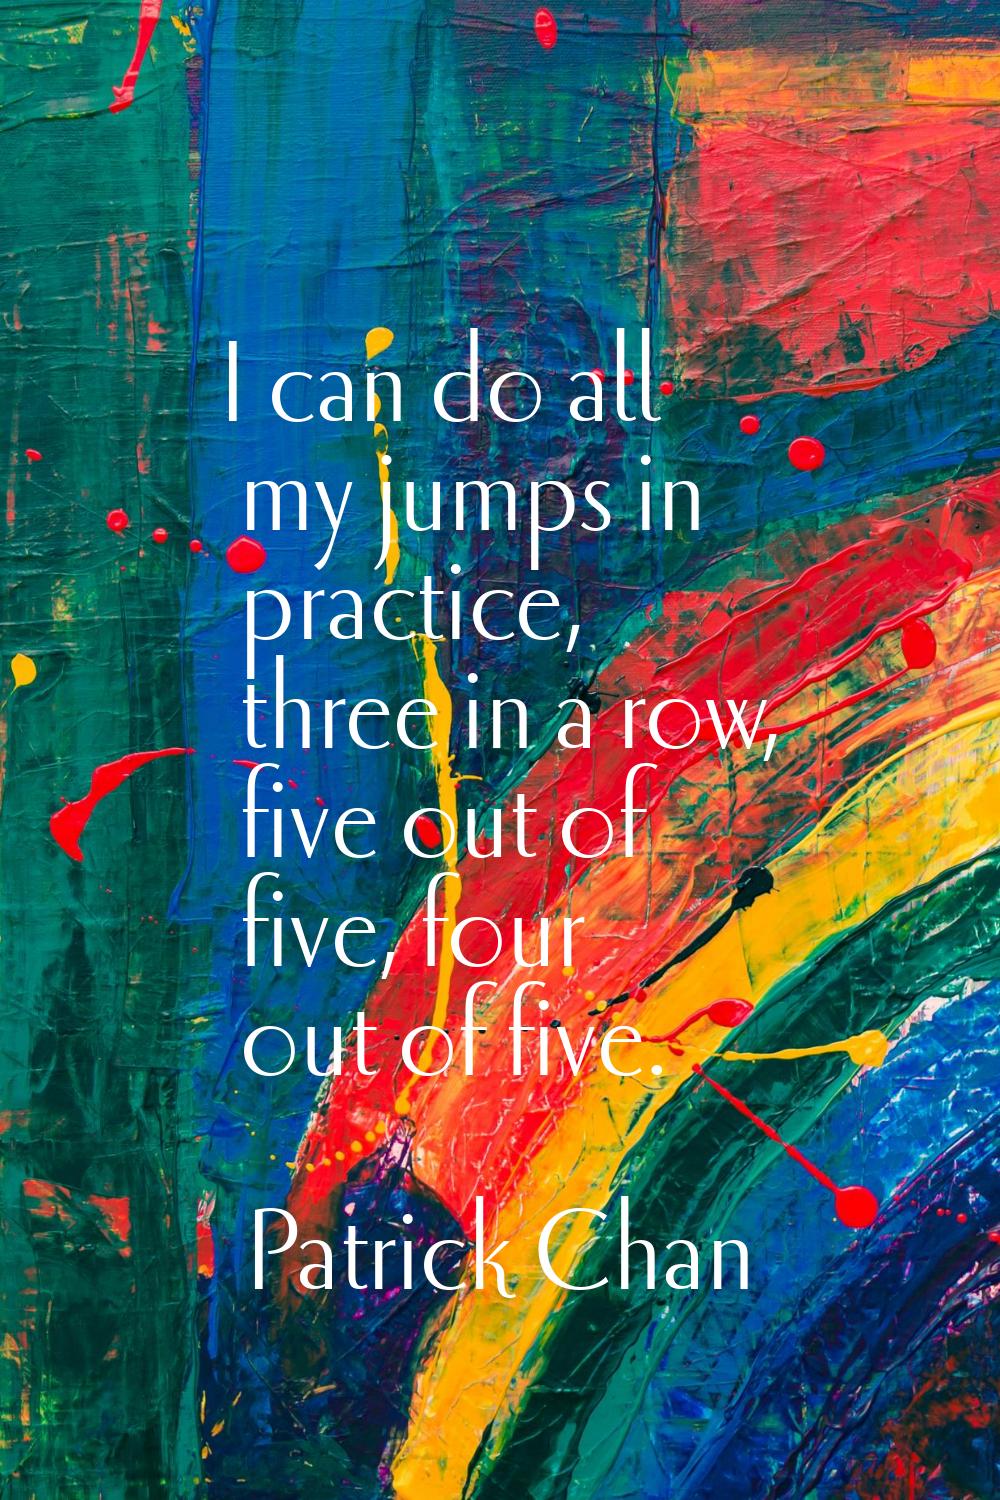 I can do all my jumps in practice, three in a row, five out of five, four out of five.